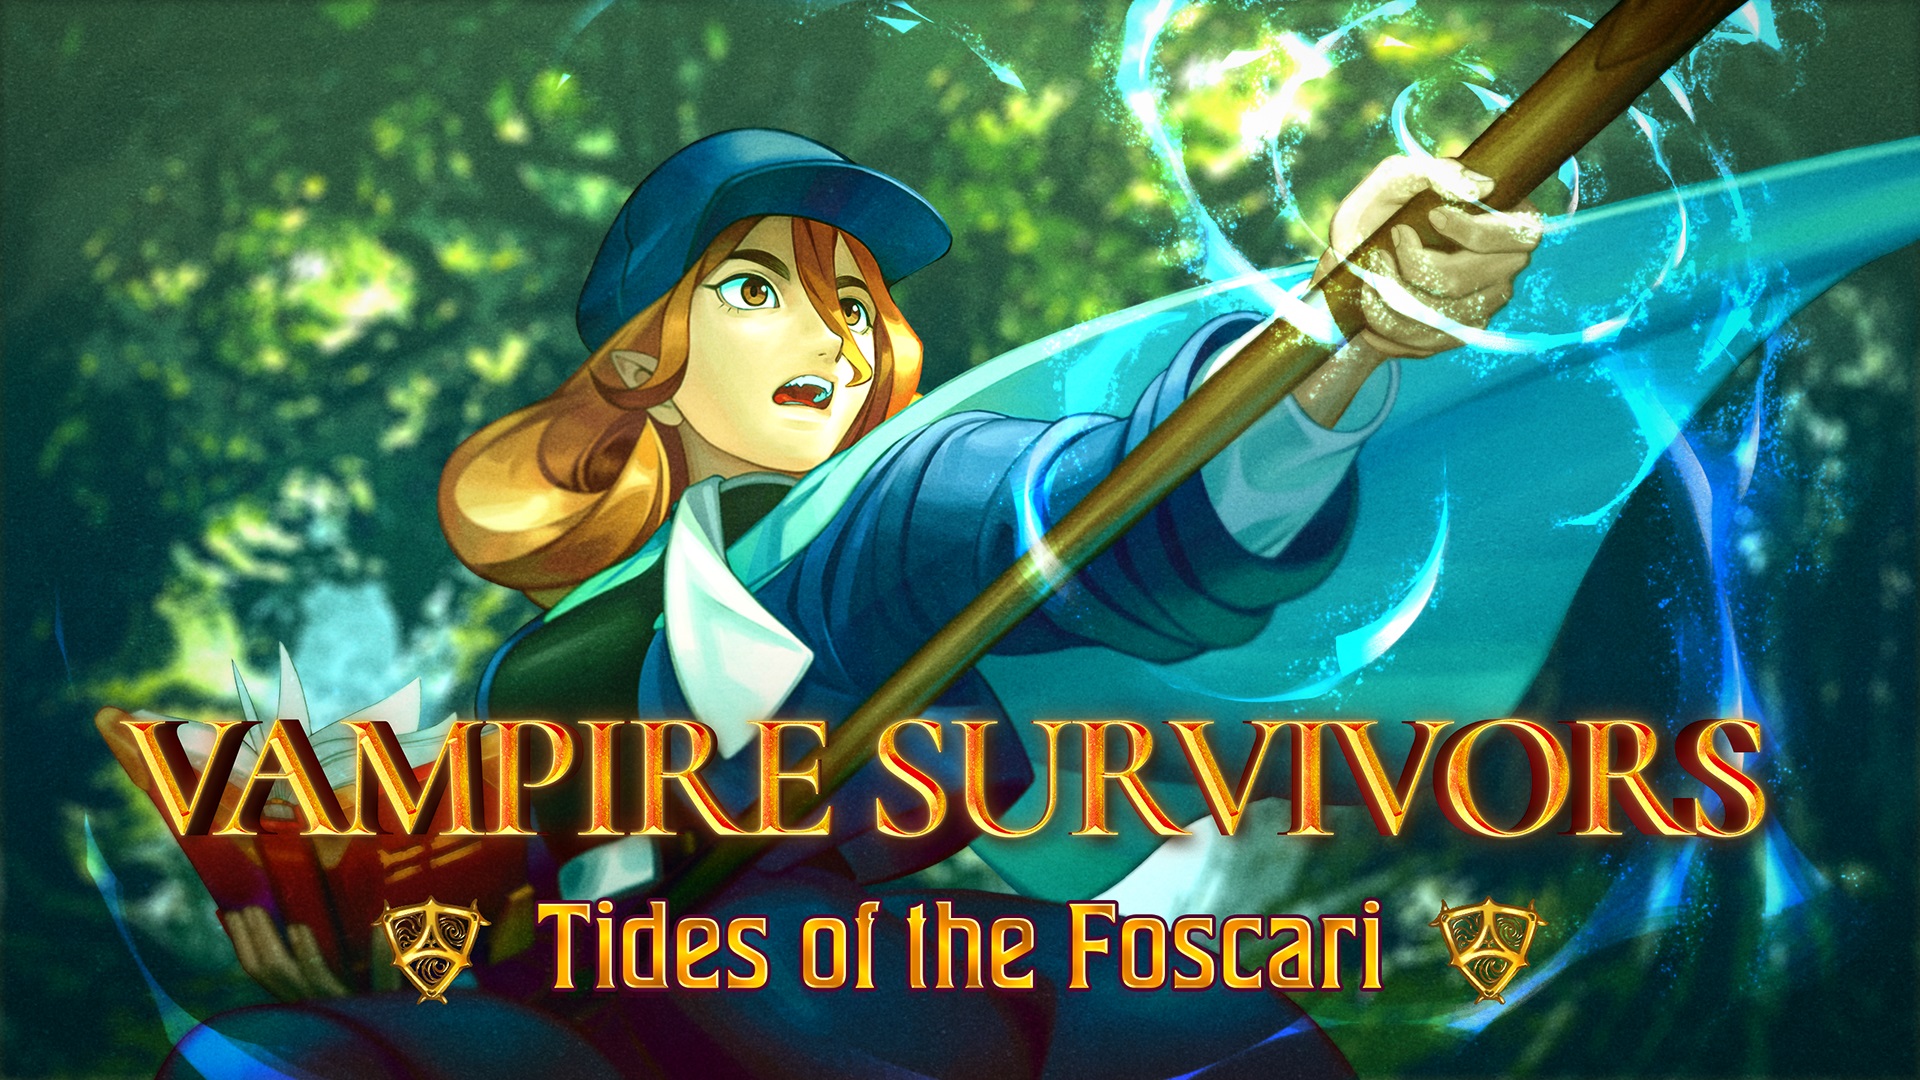 Vampire Survivors' Second DLC Weaves an Enchanted Fairy Tale On